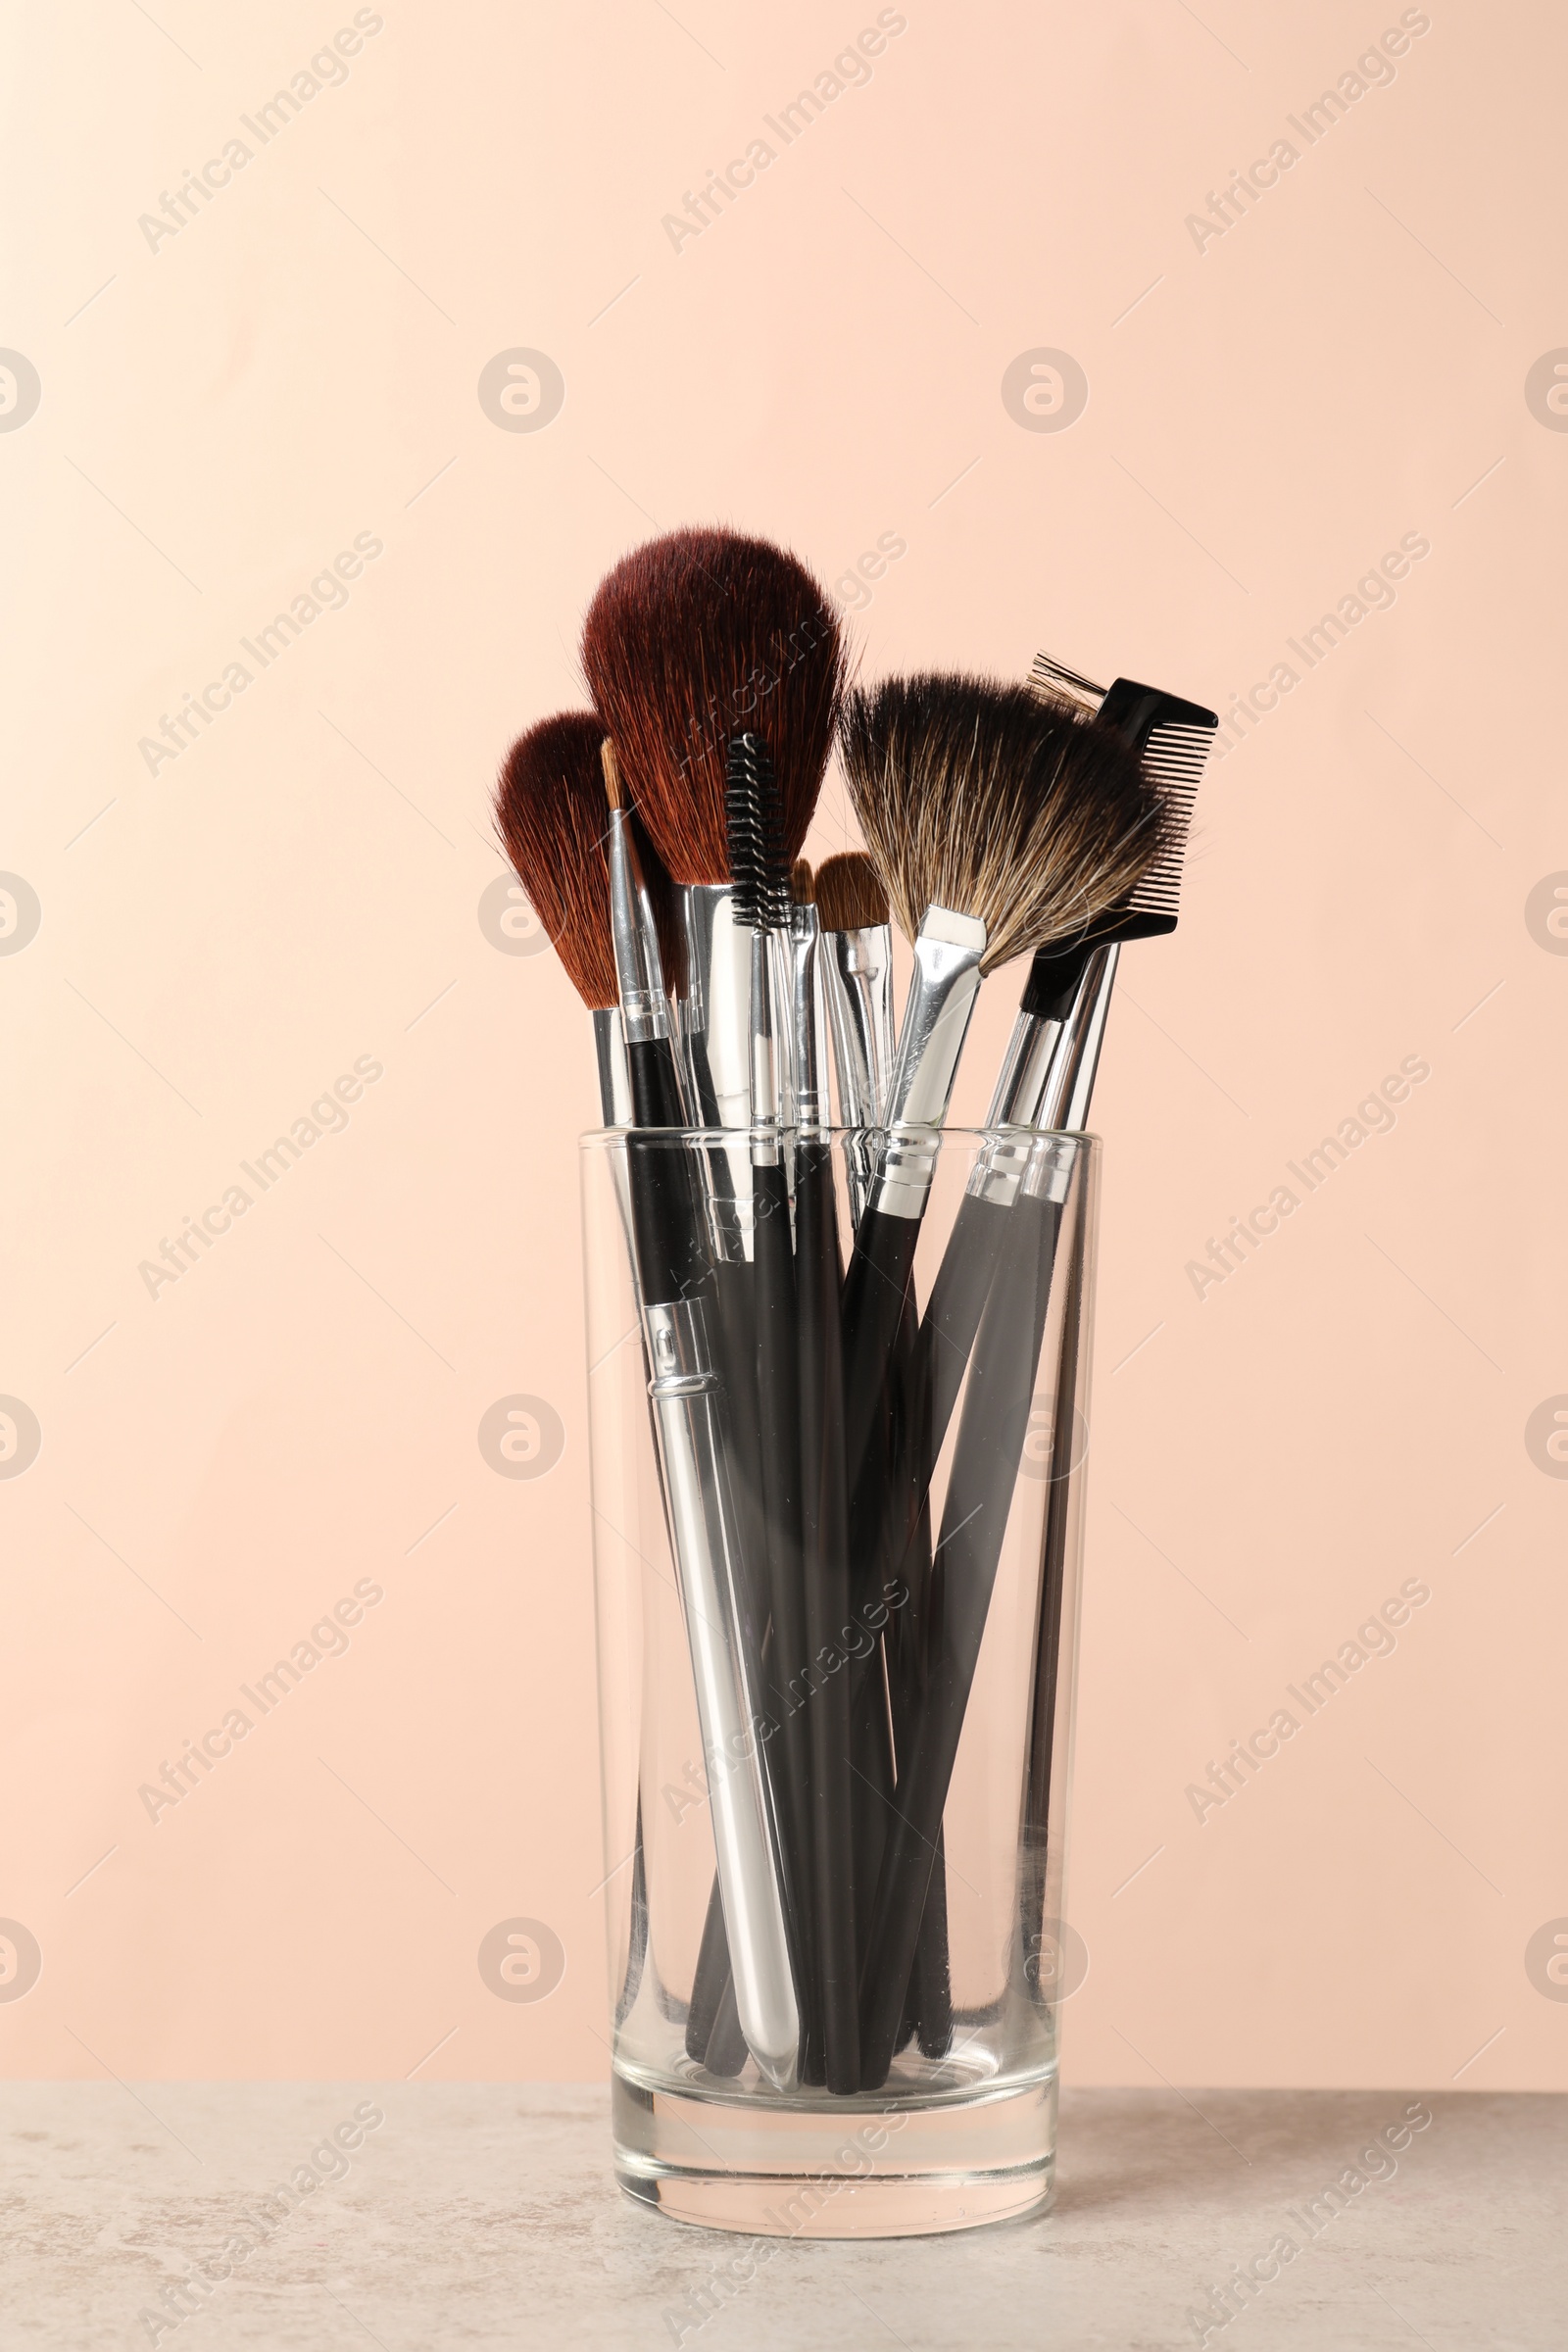 Photo of Set of professional makeup brushes on grey table against beige background